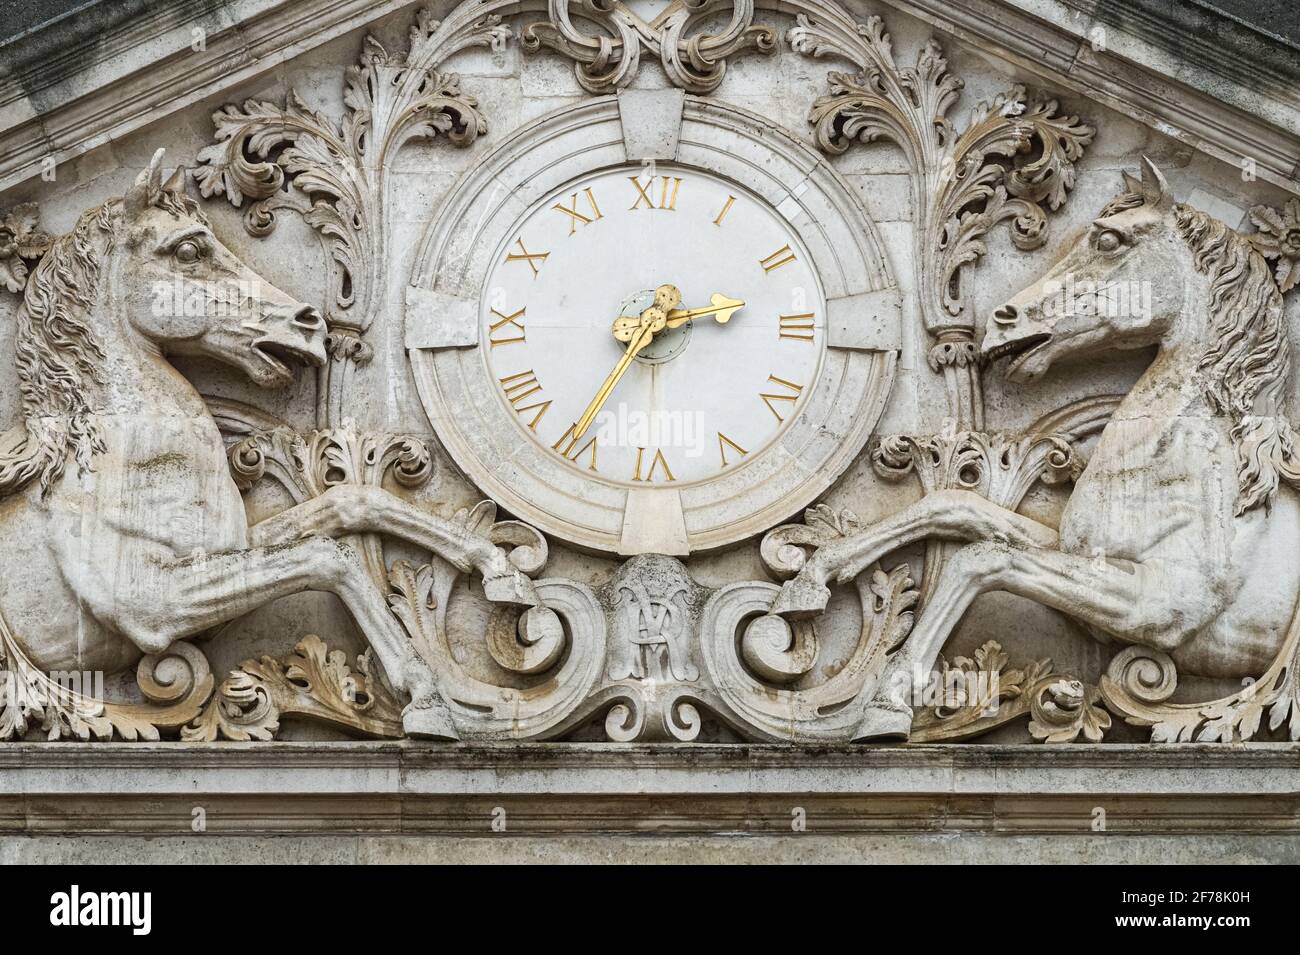 Clock and horse ornamental sculptures on the Household Cavalry Mounted Regiment building in London, England United Kingdom UK Stock Photo